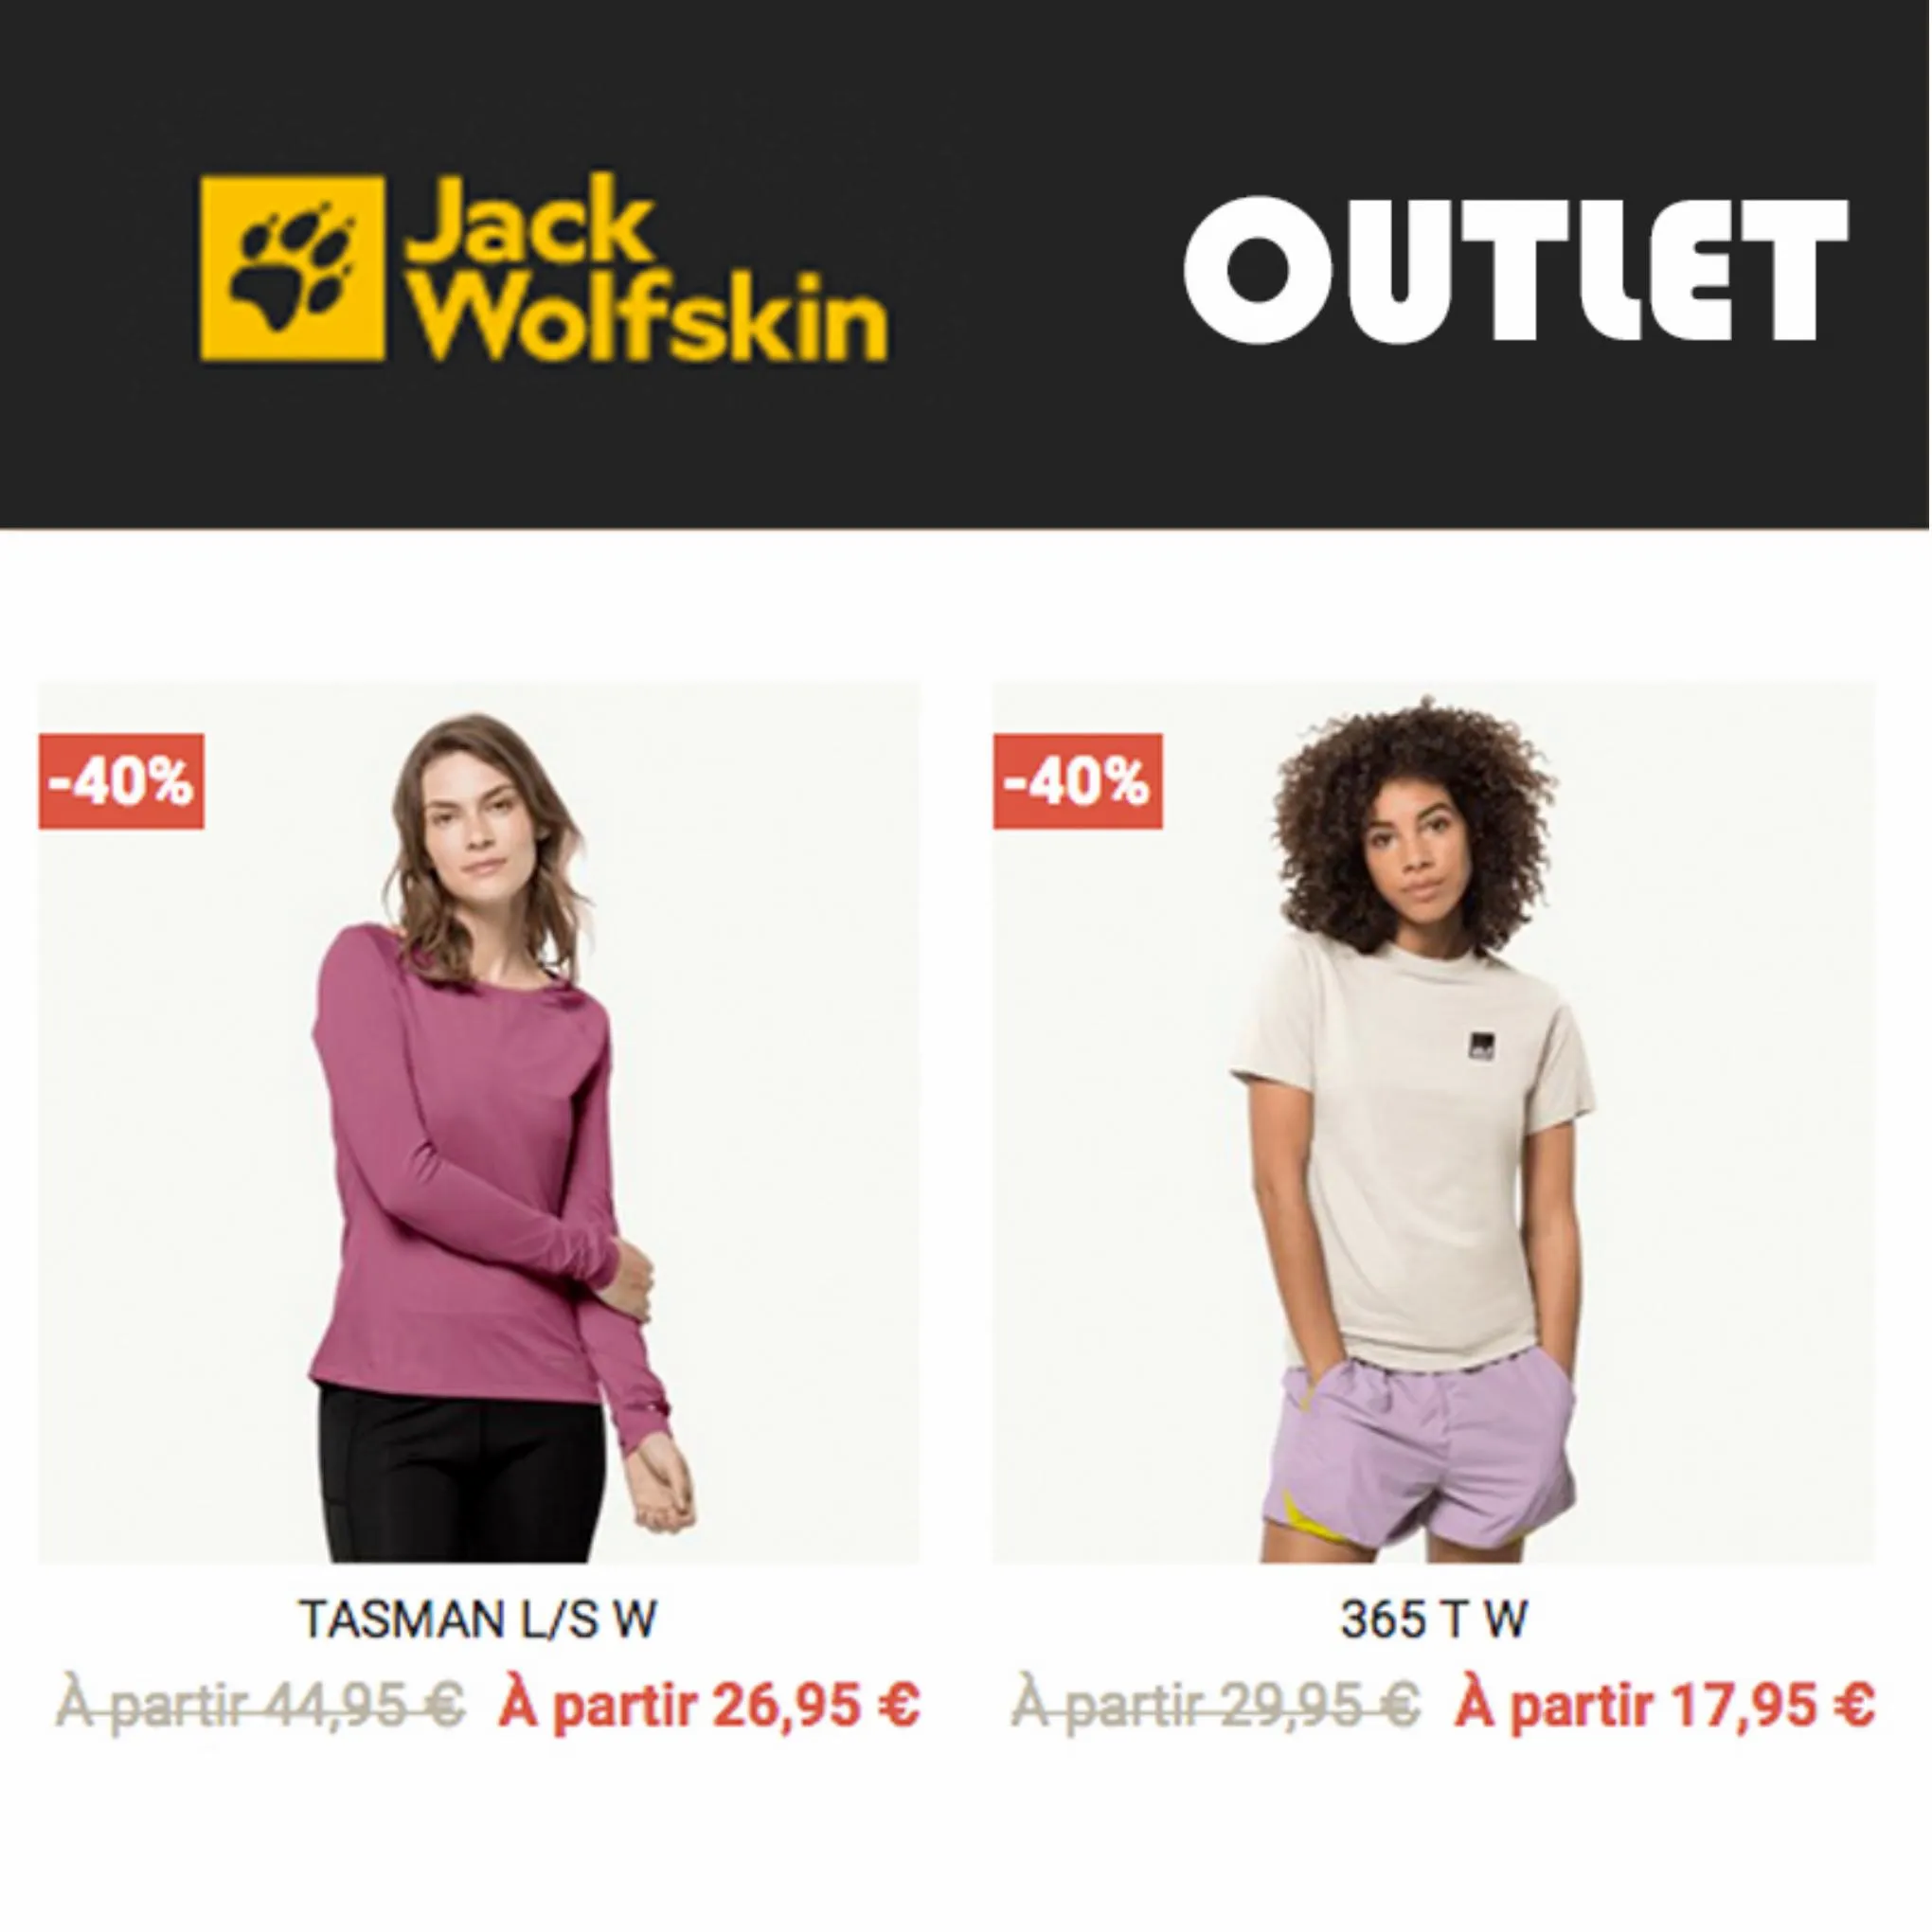 Catalogue Outlet Jack Wolfskin, page 00003